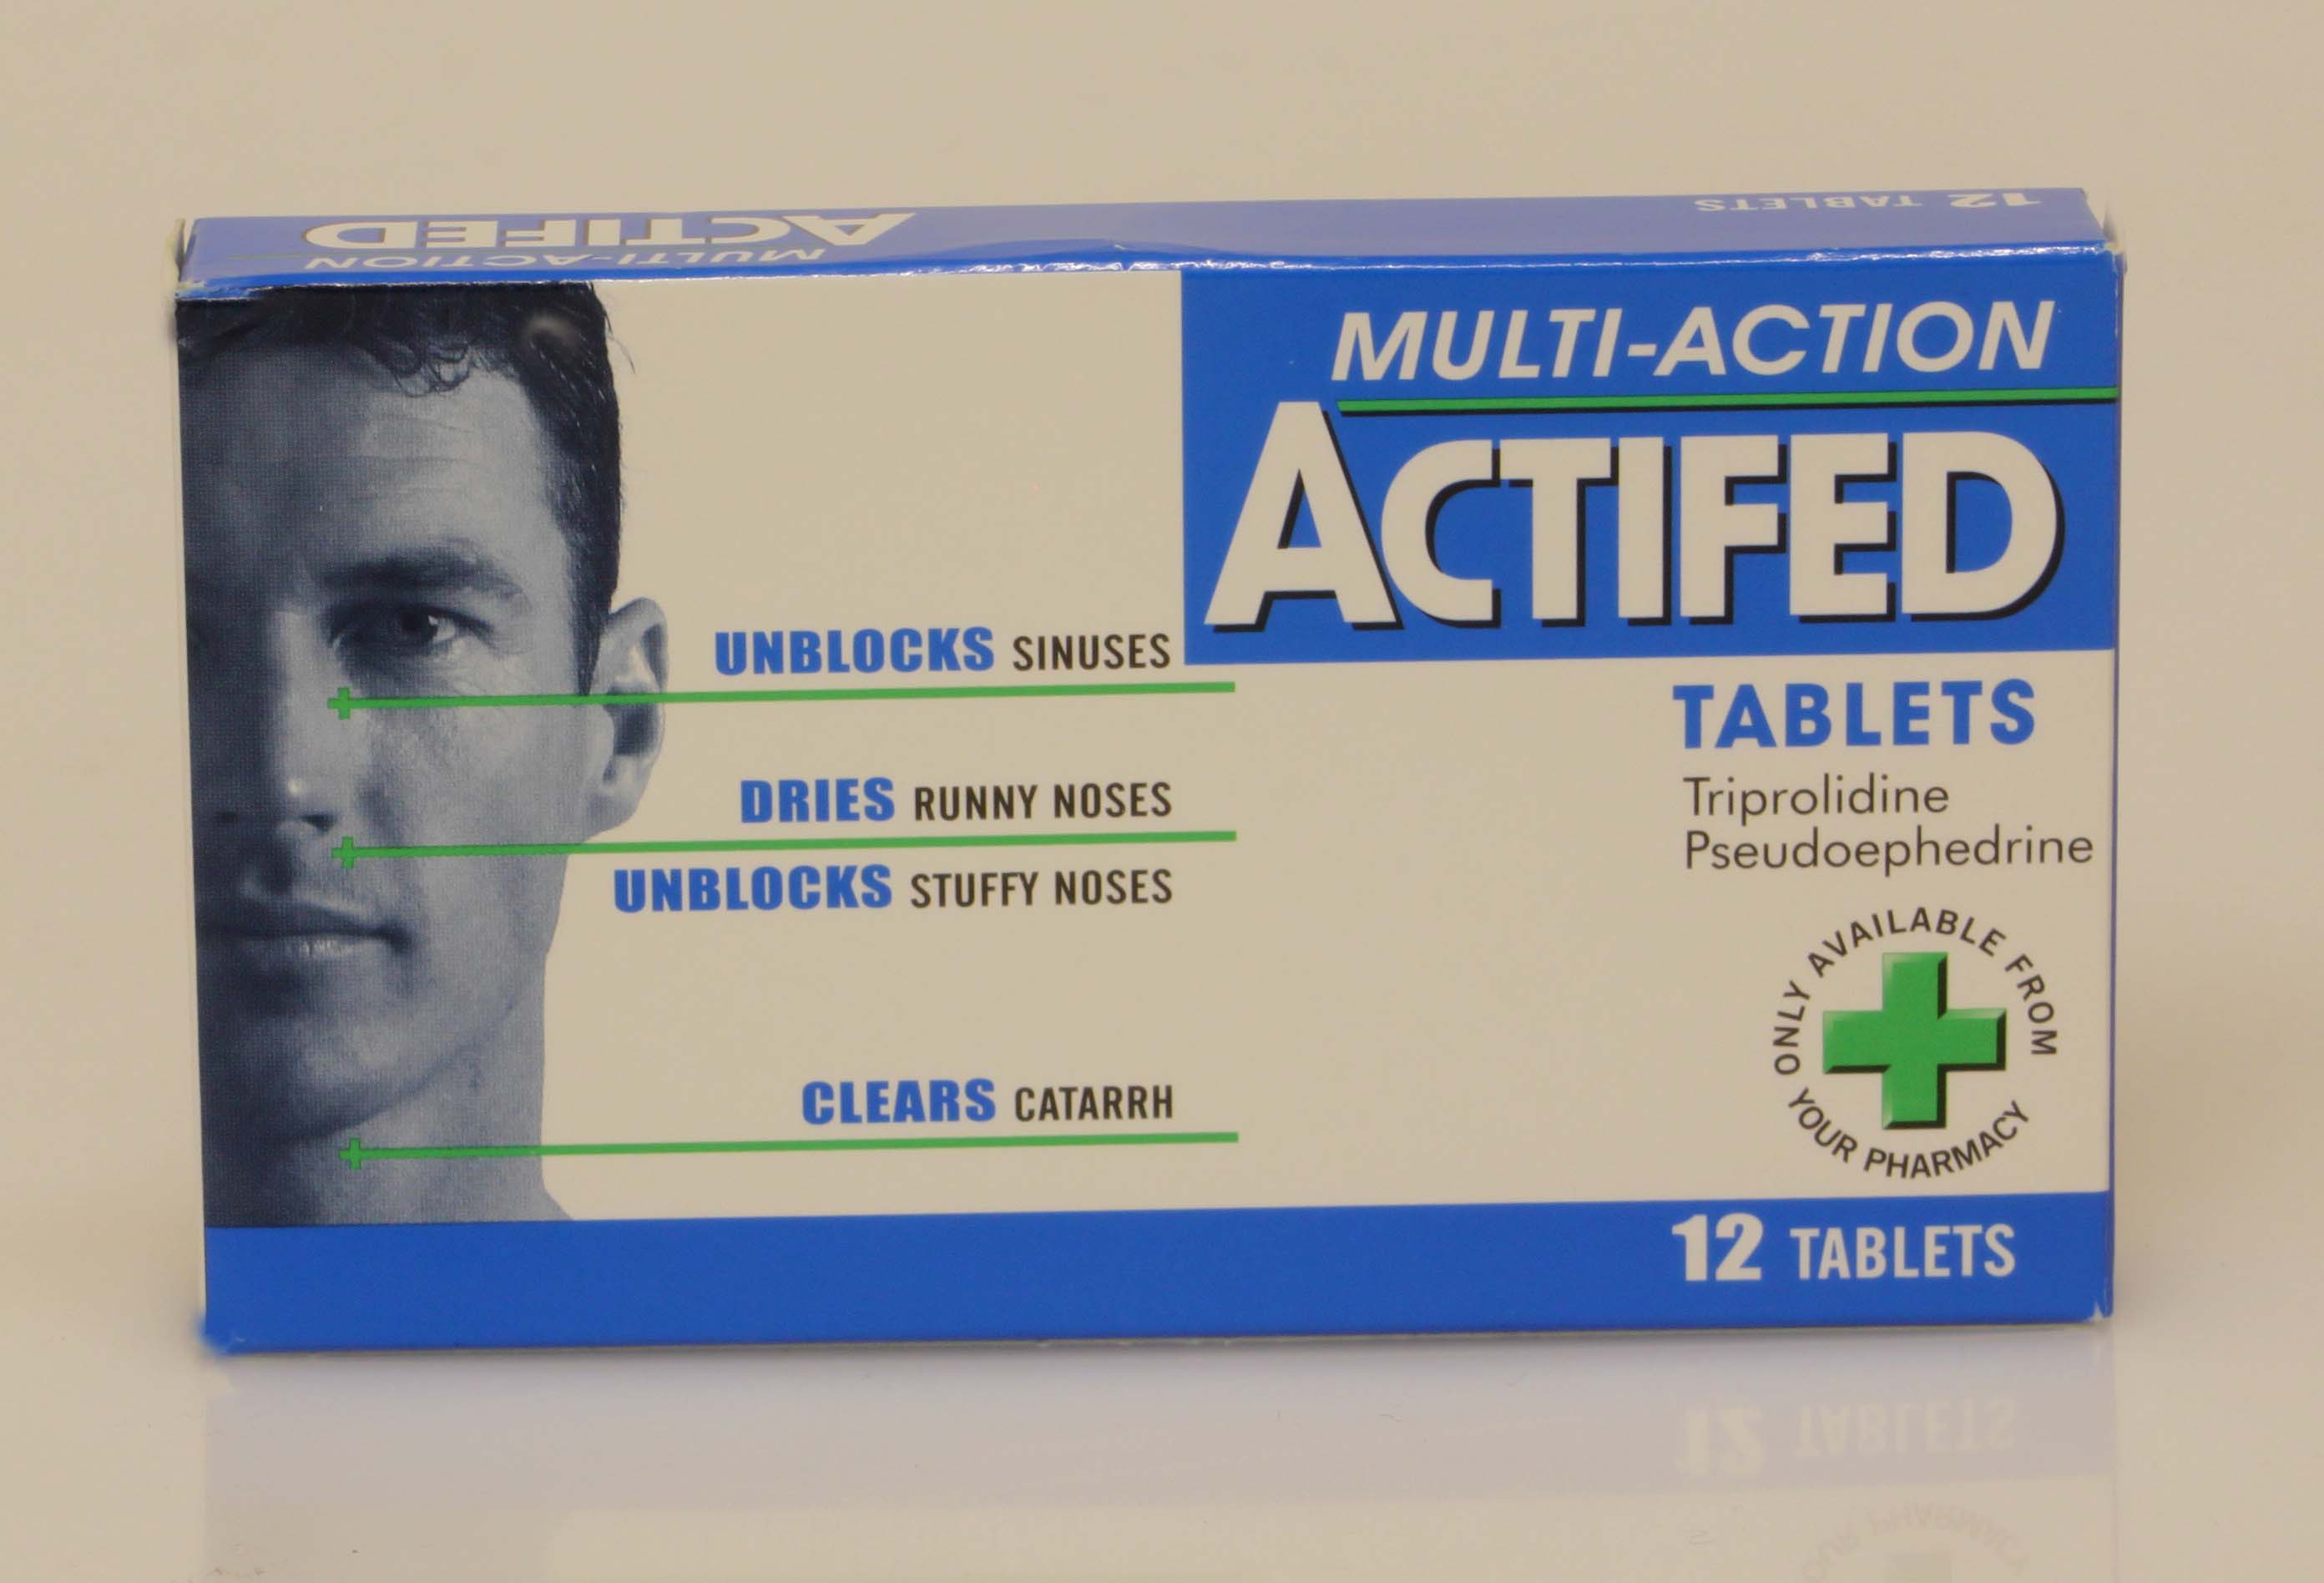 Actifed tablets - 12tablets